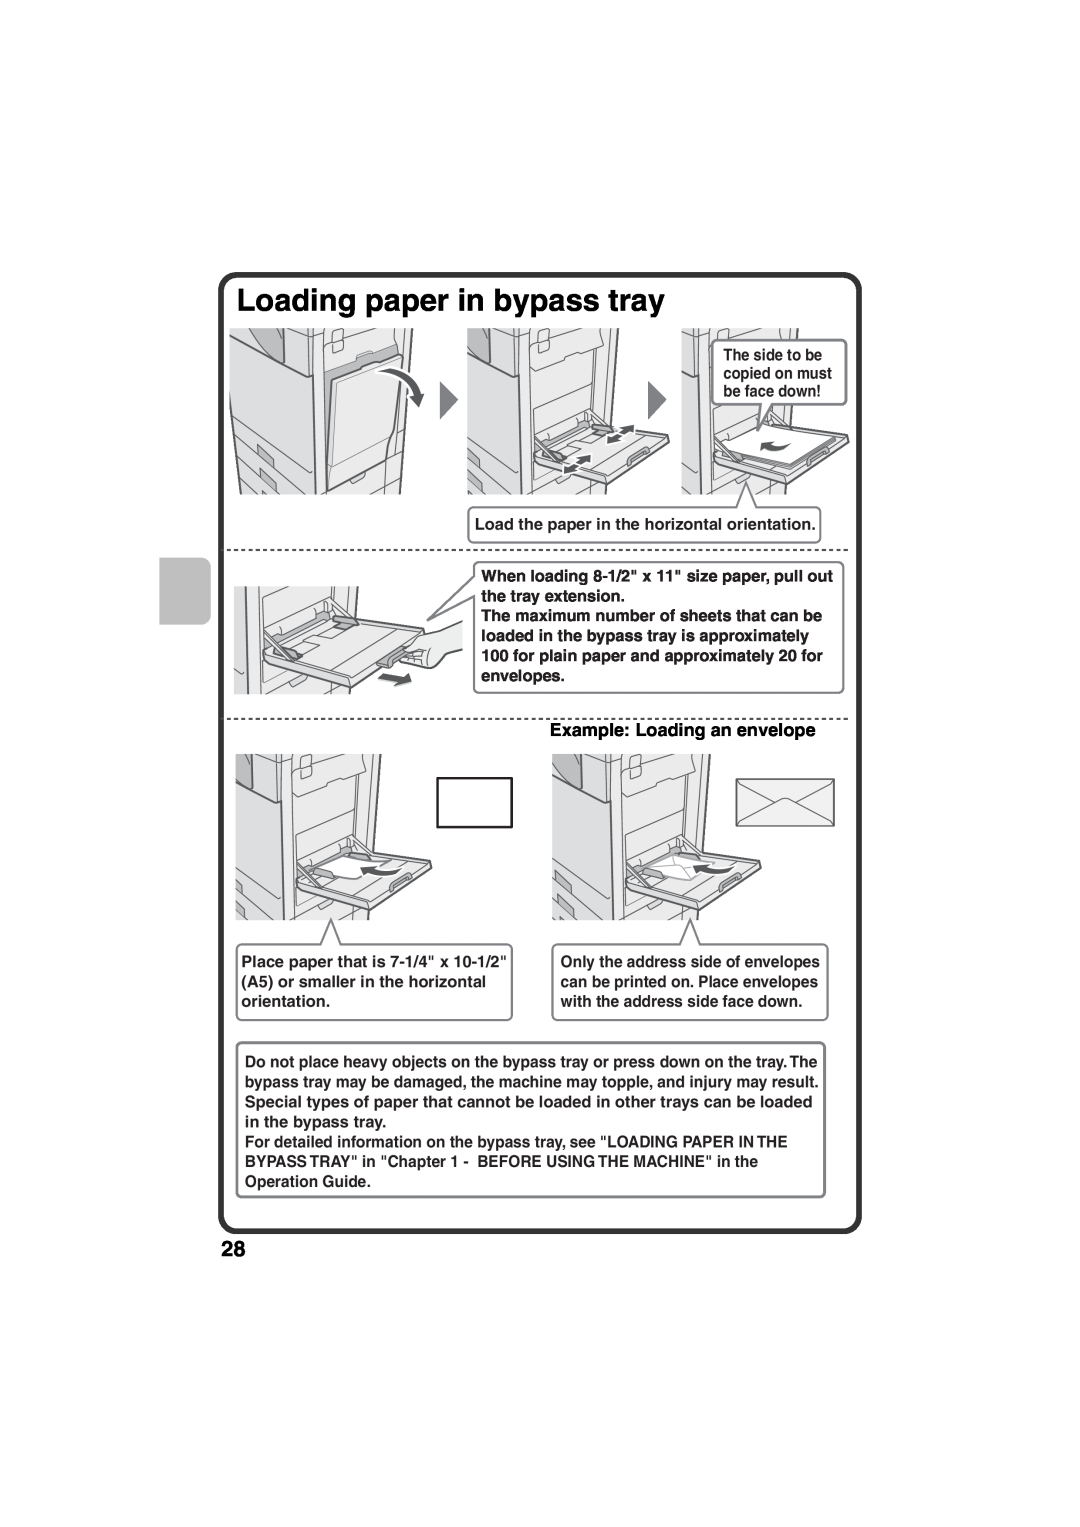 Sharp MX-B401, TINSE4377FCZZ quick start Loading paper in bypass tray, Example Loading an envelope 